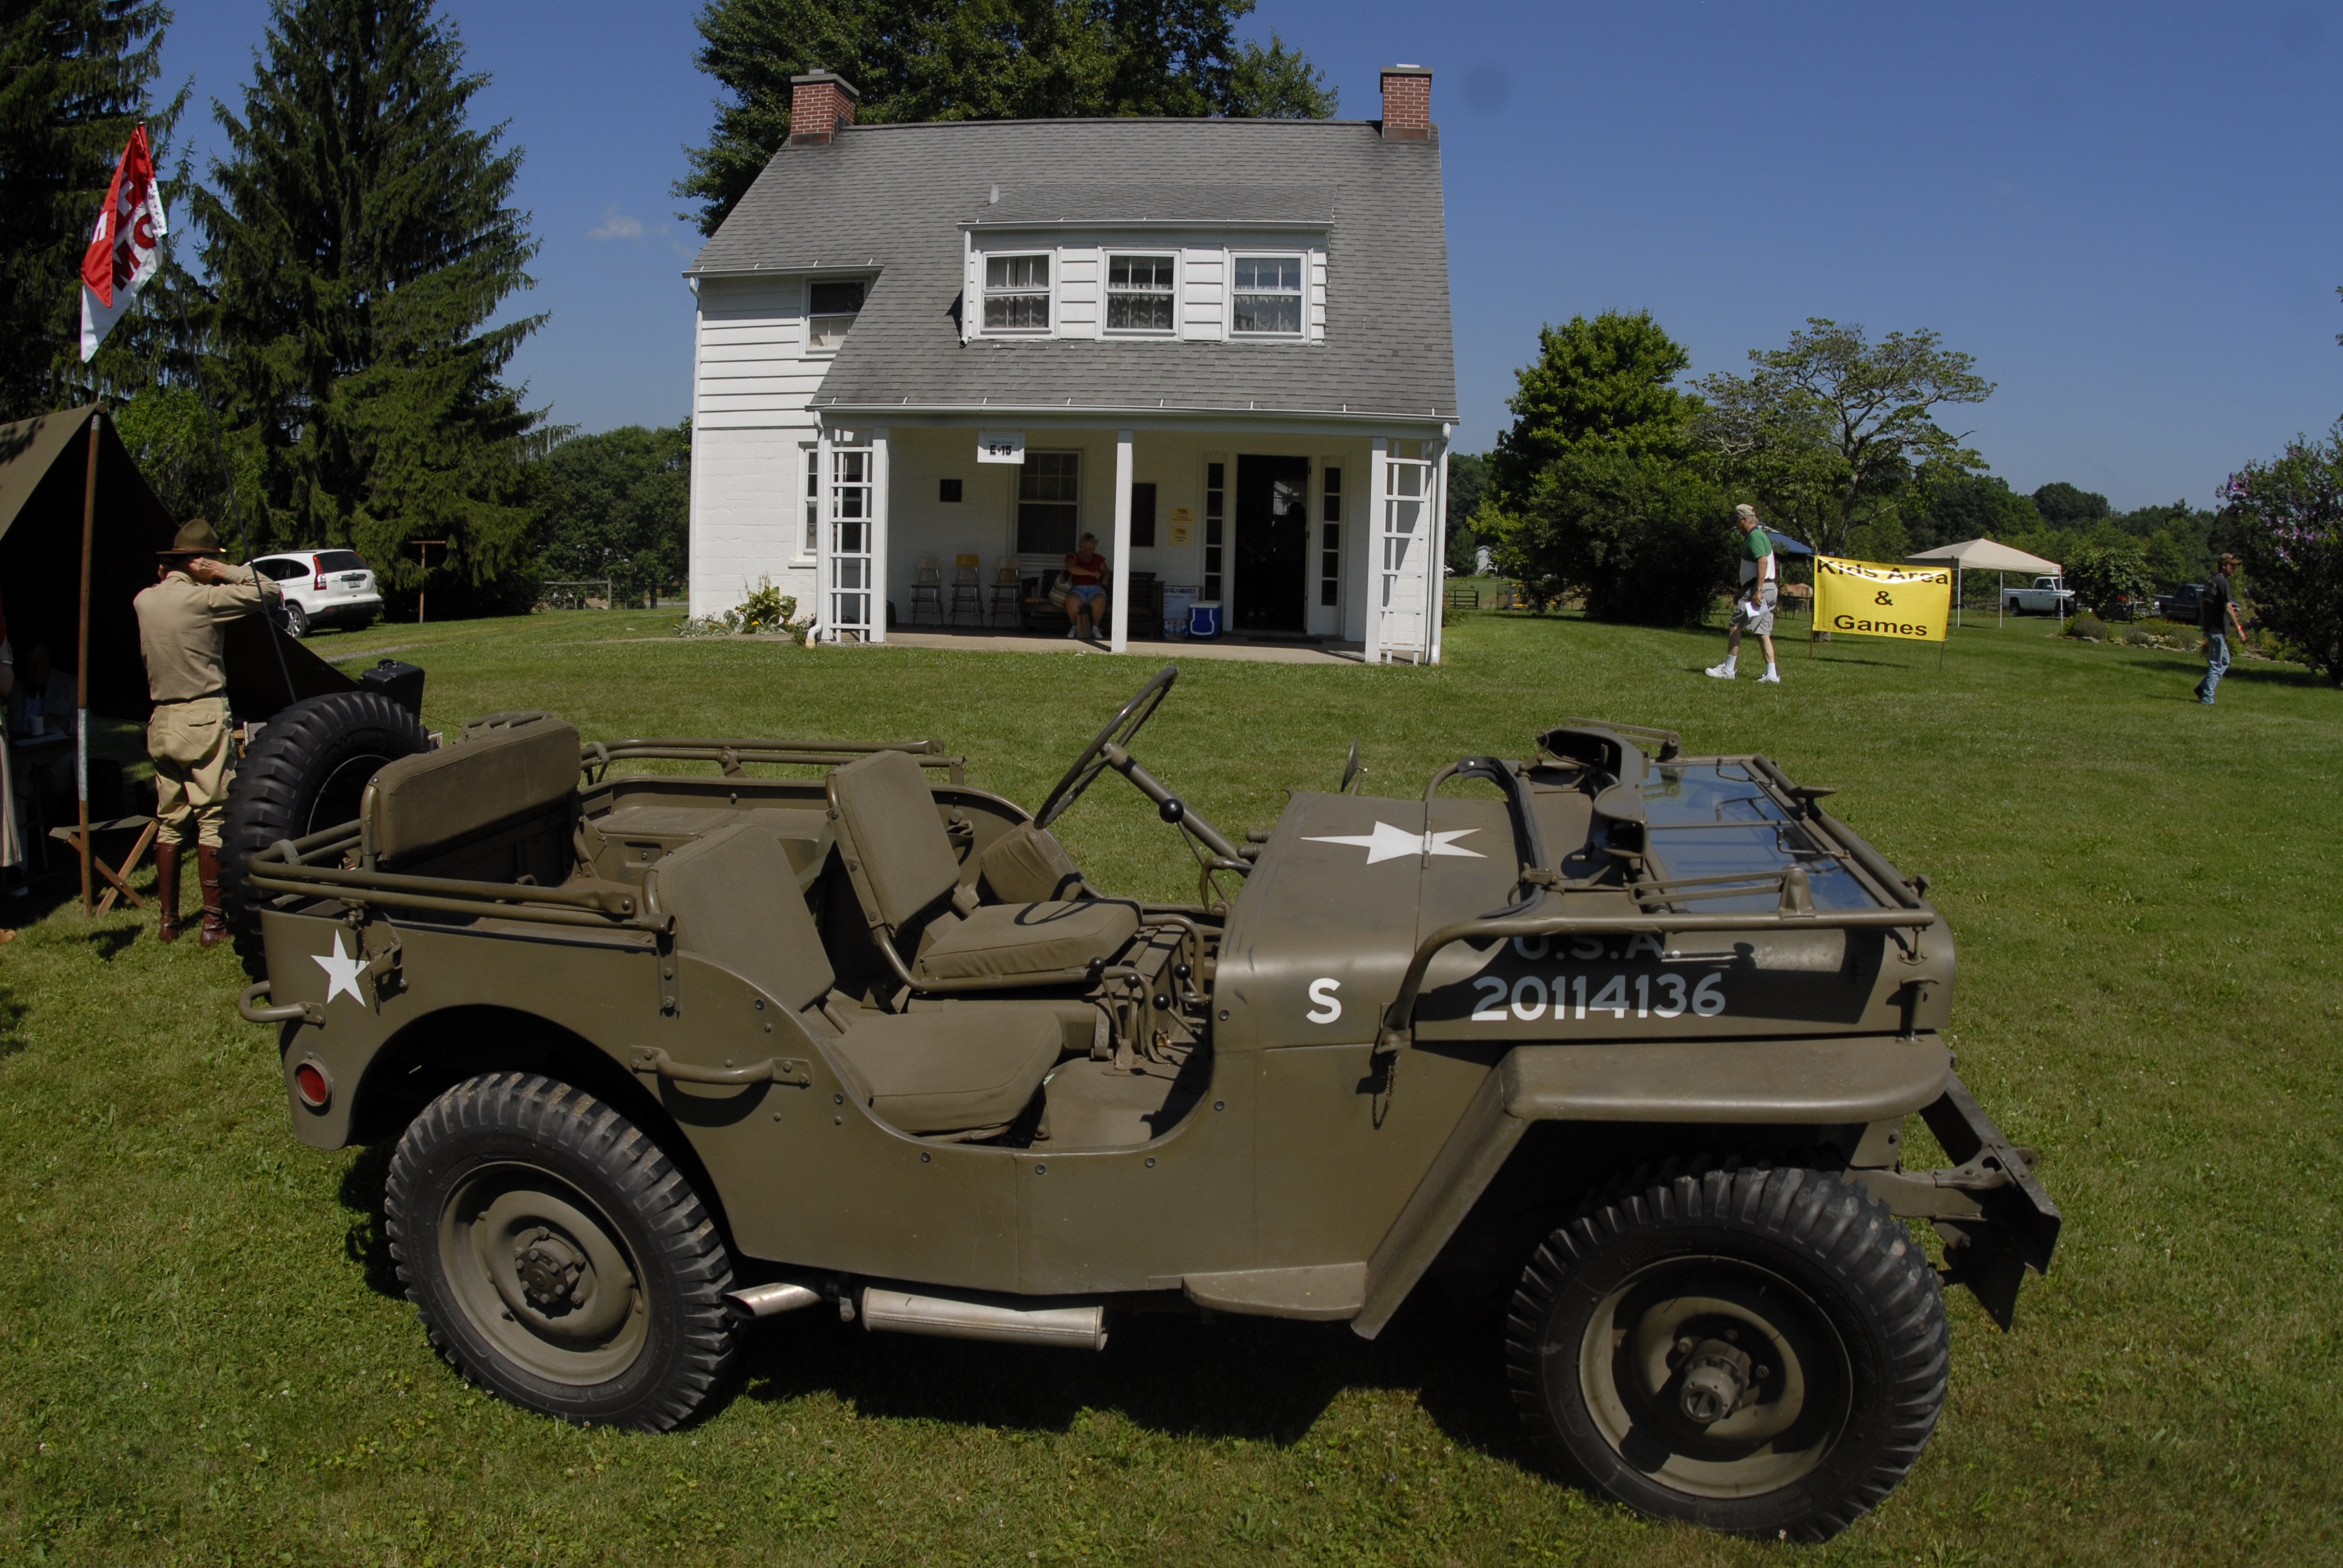 WWII Jeep at the New Deal Festival in front of the E-15 homestead